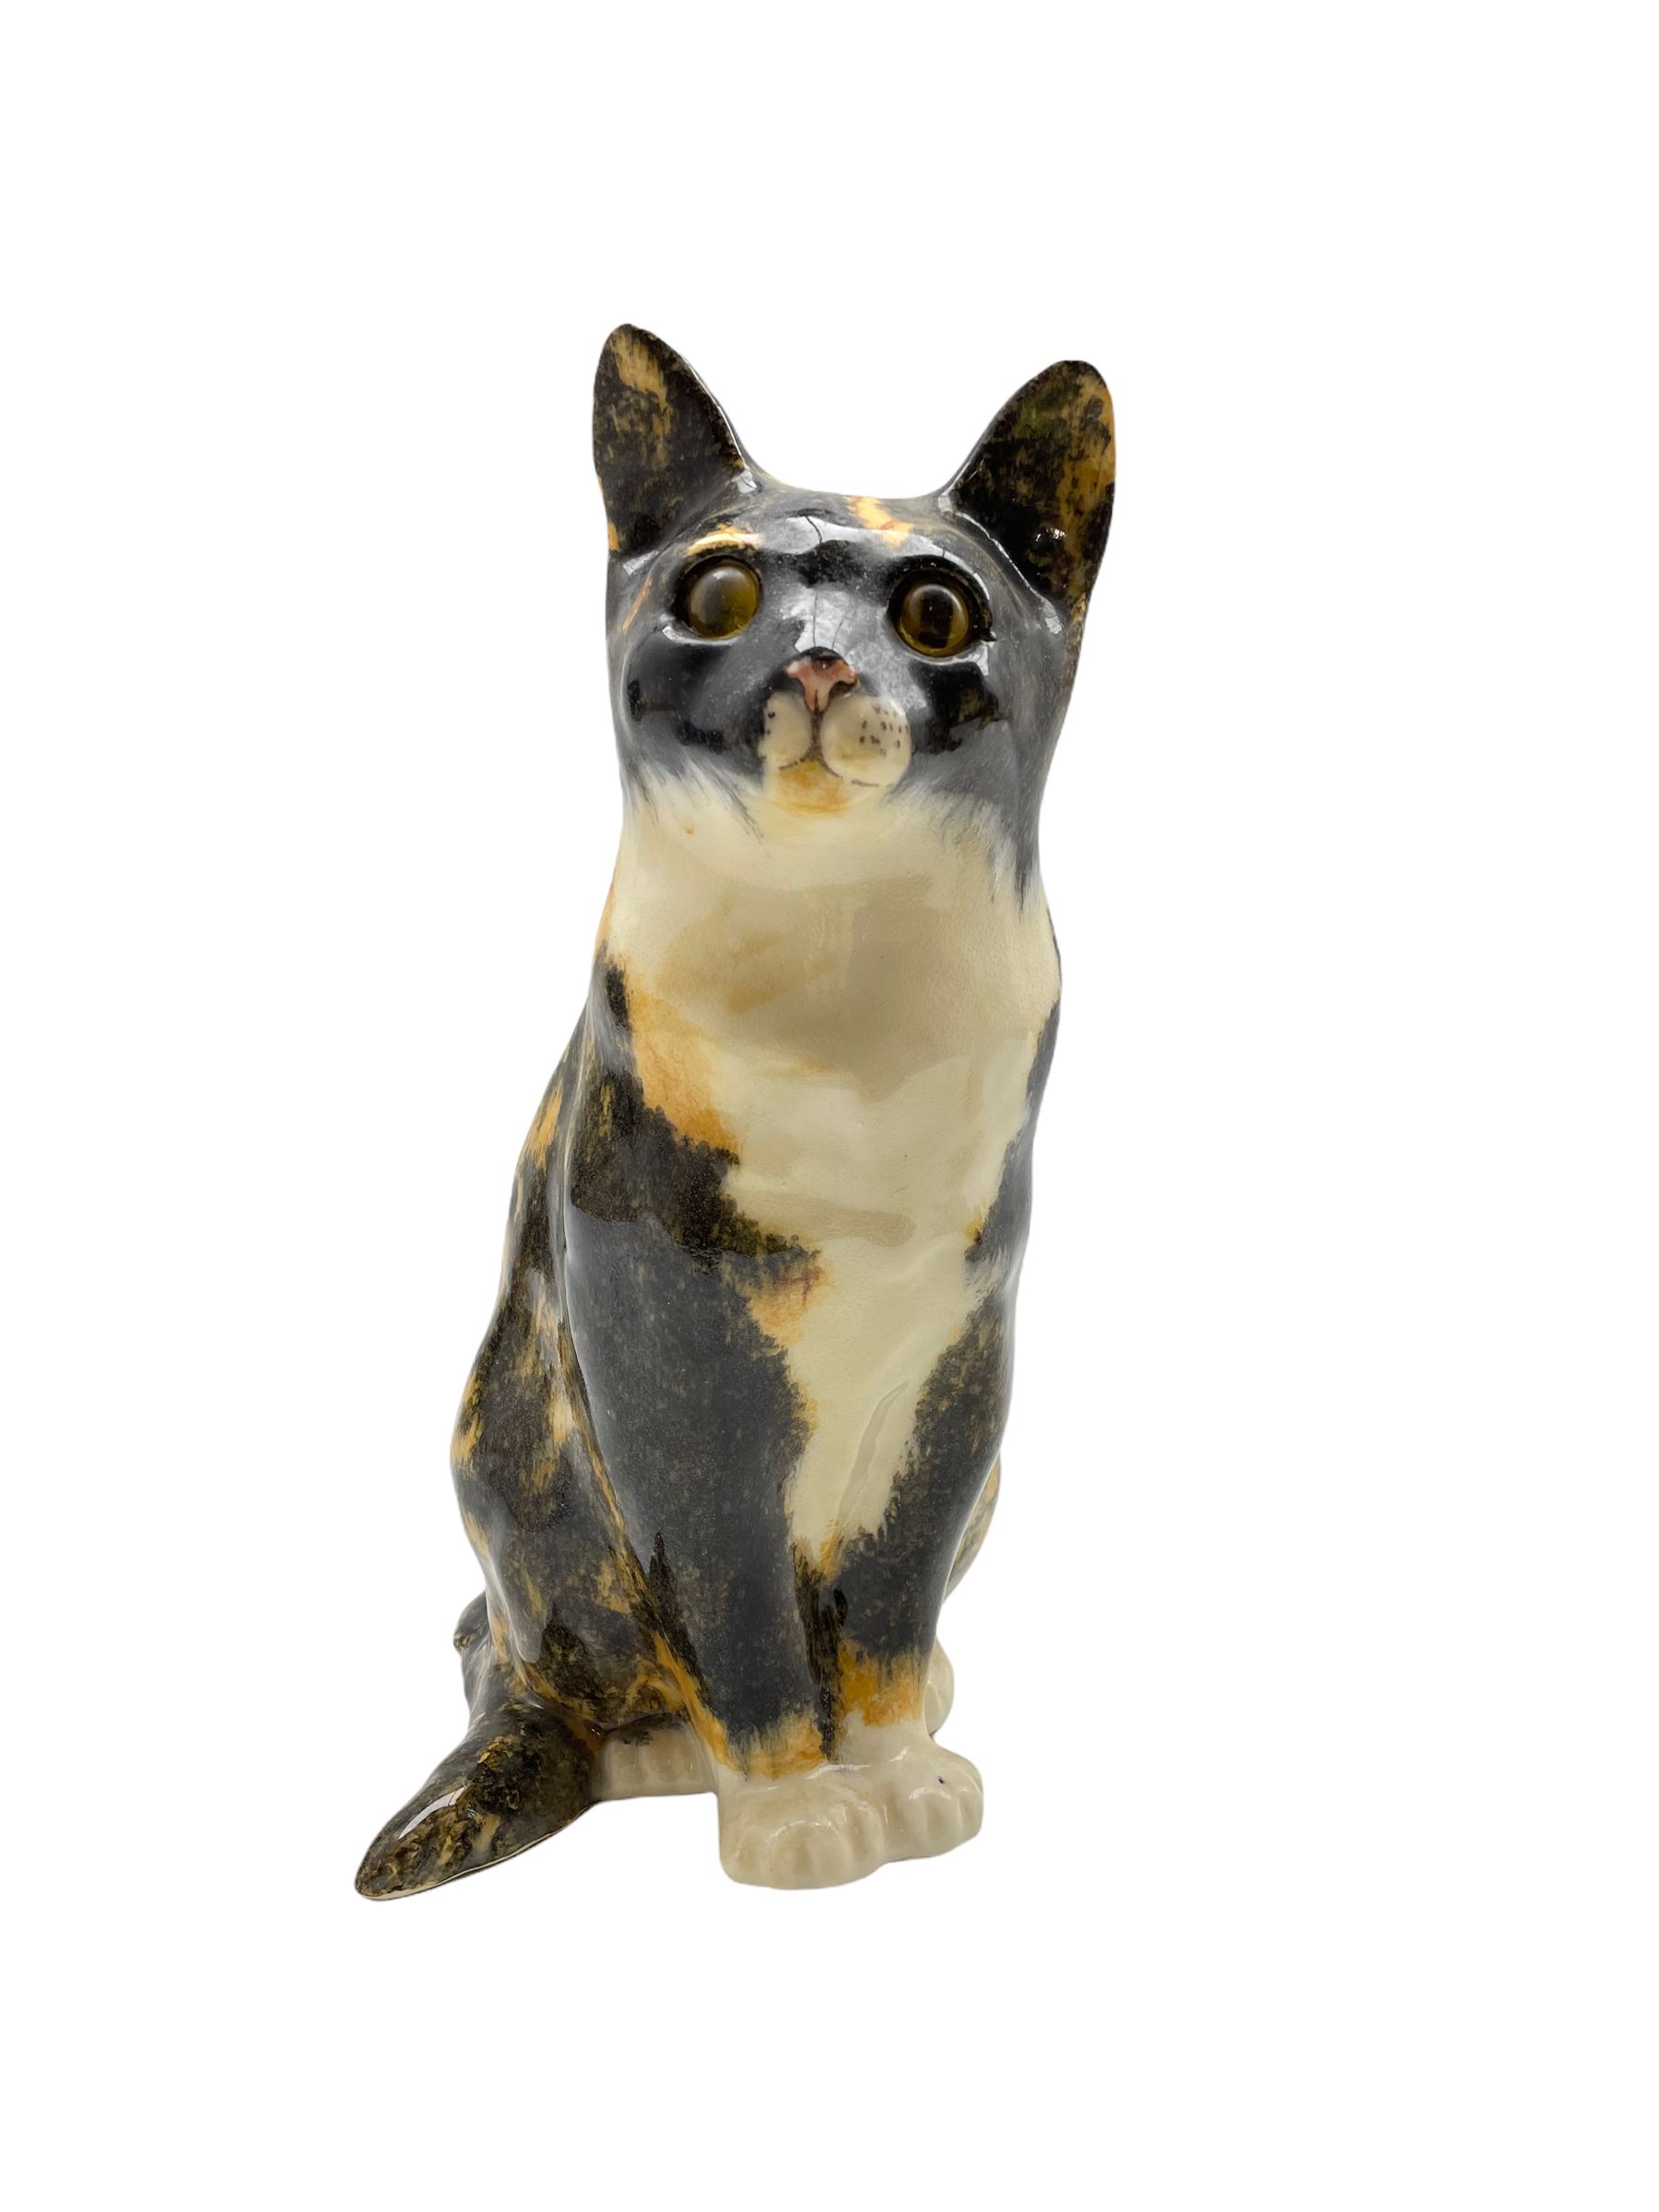 Winstanley pottery model of a seated Cat